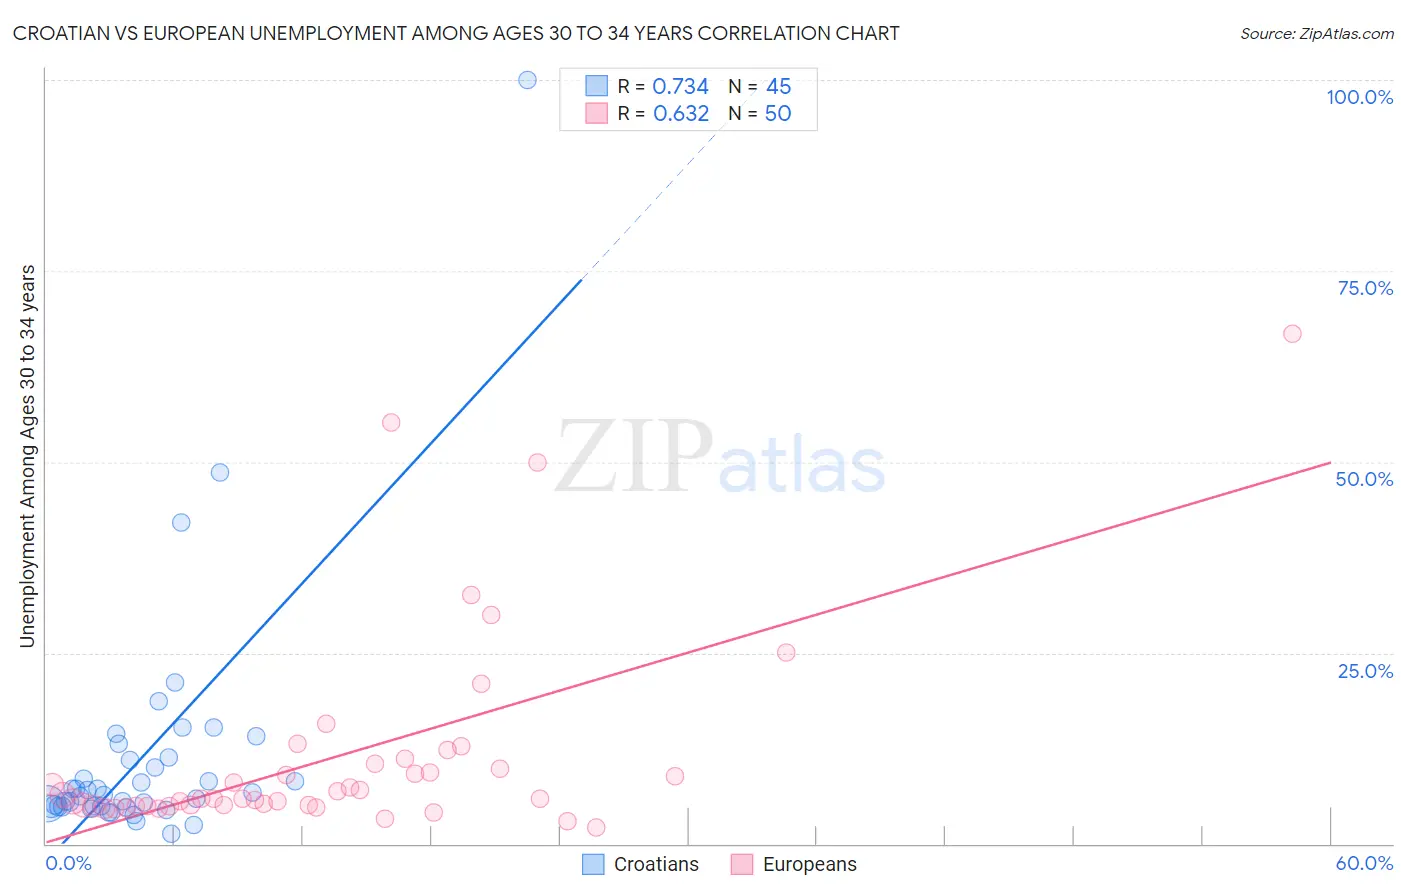 Croatian vs European Unemployment Among Ages 30 to 34 years